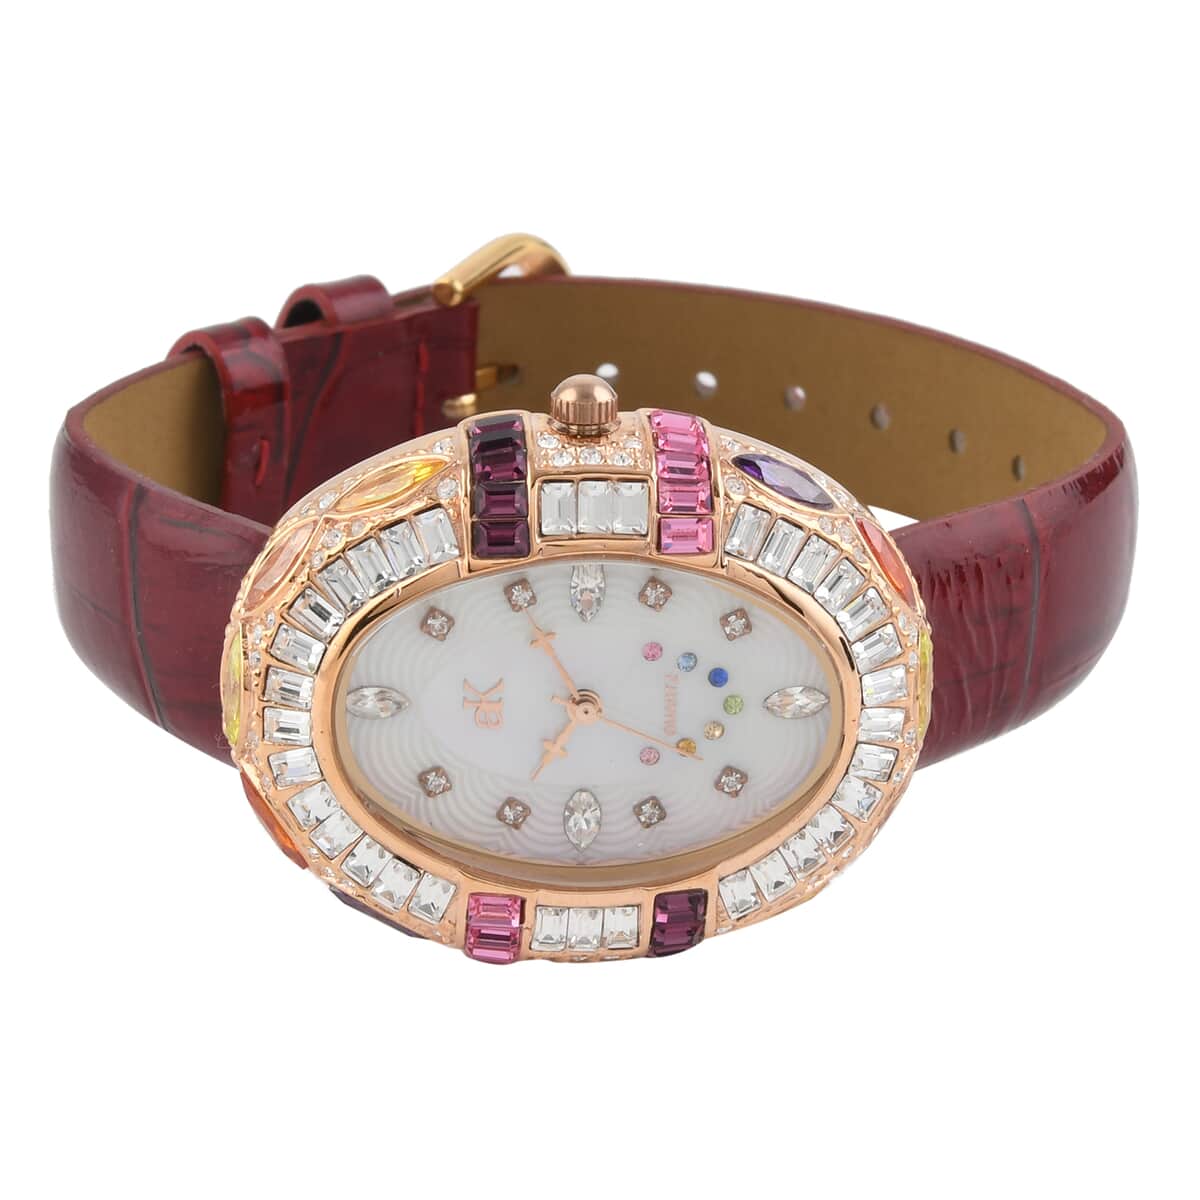 ADEE KAYE Crown Austrian Crystal Japanese Movement Genuine Leather Watch in Red (34mm) image number 2